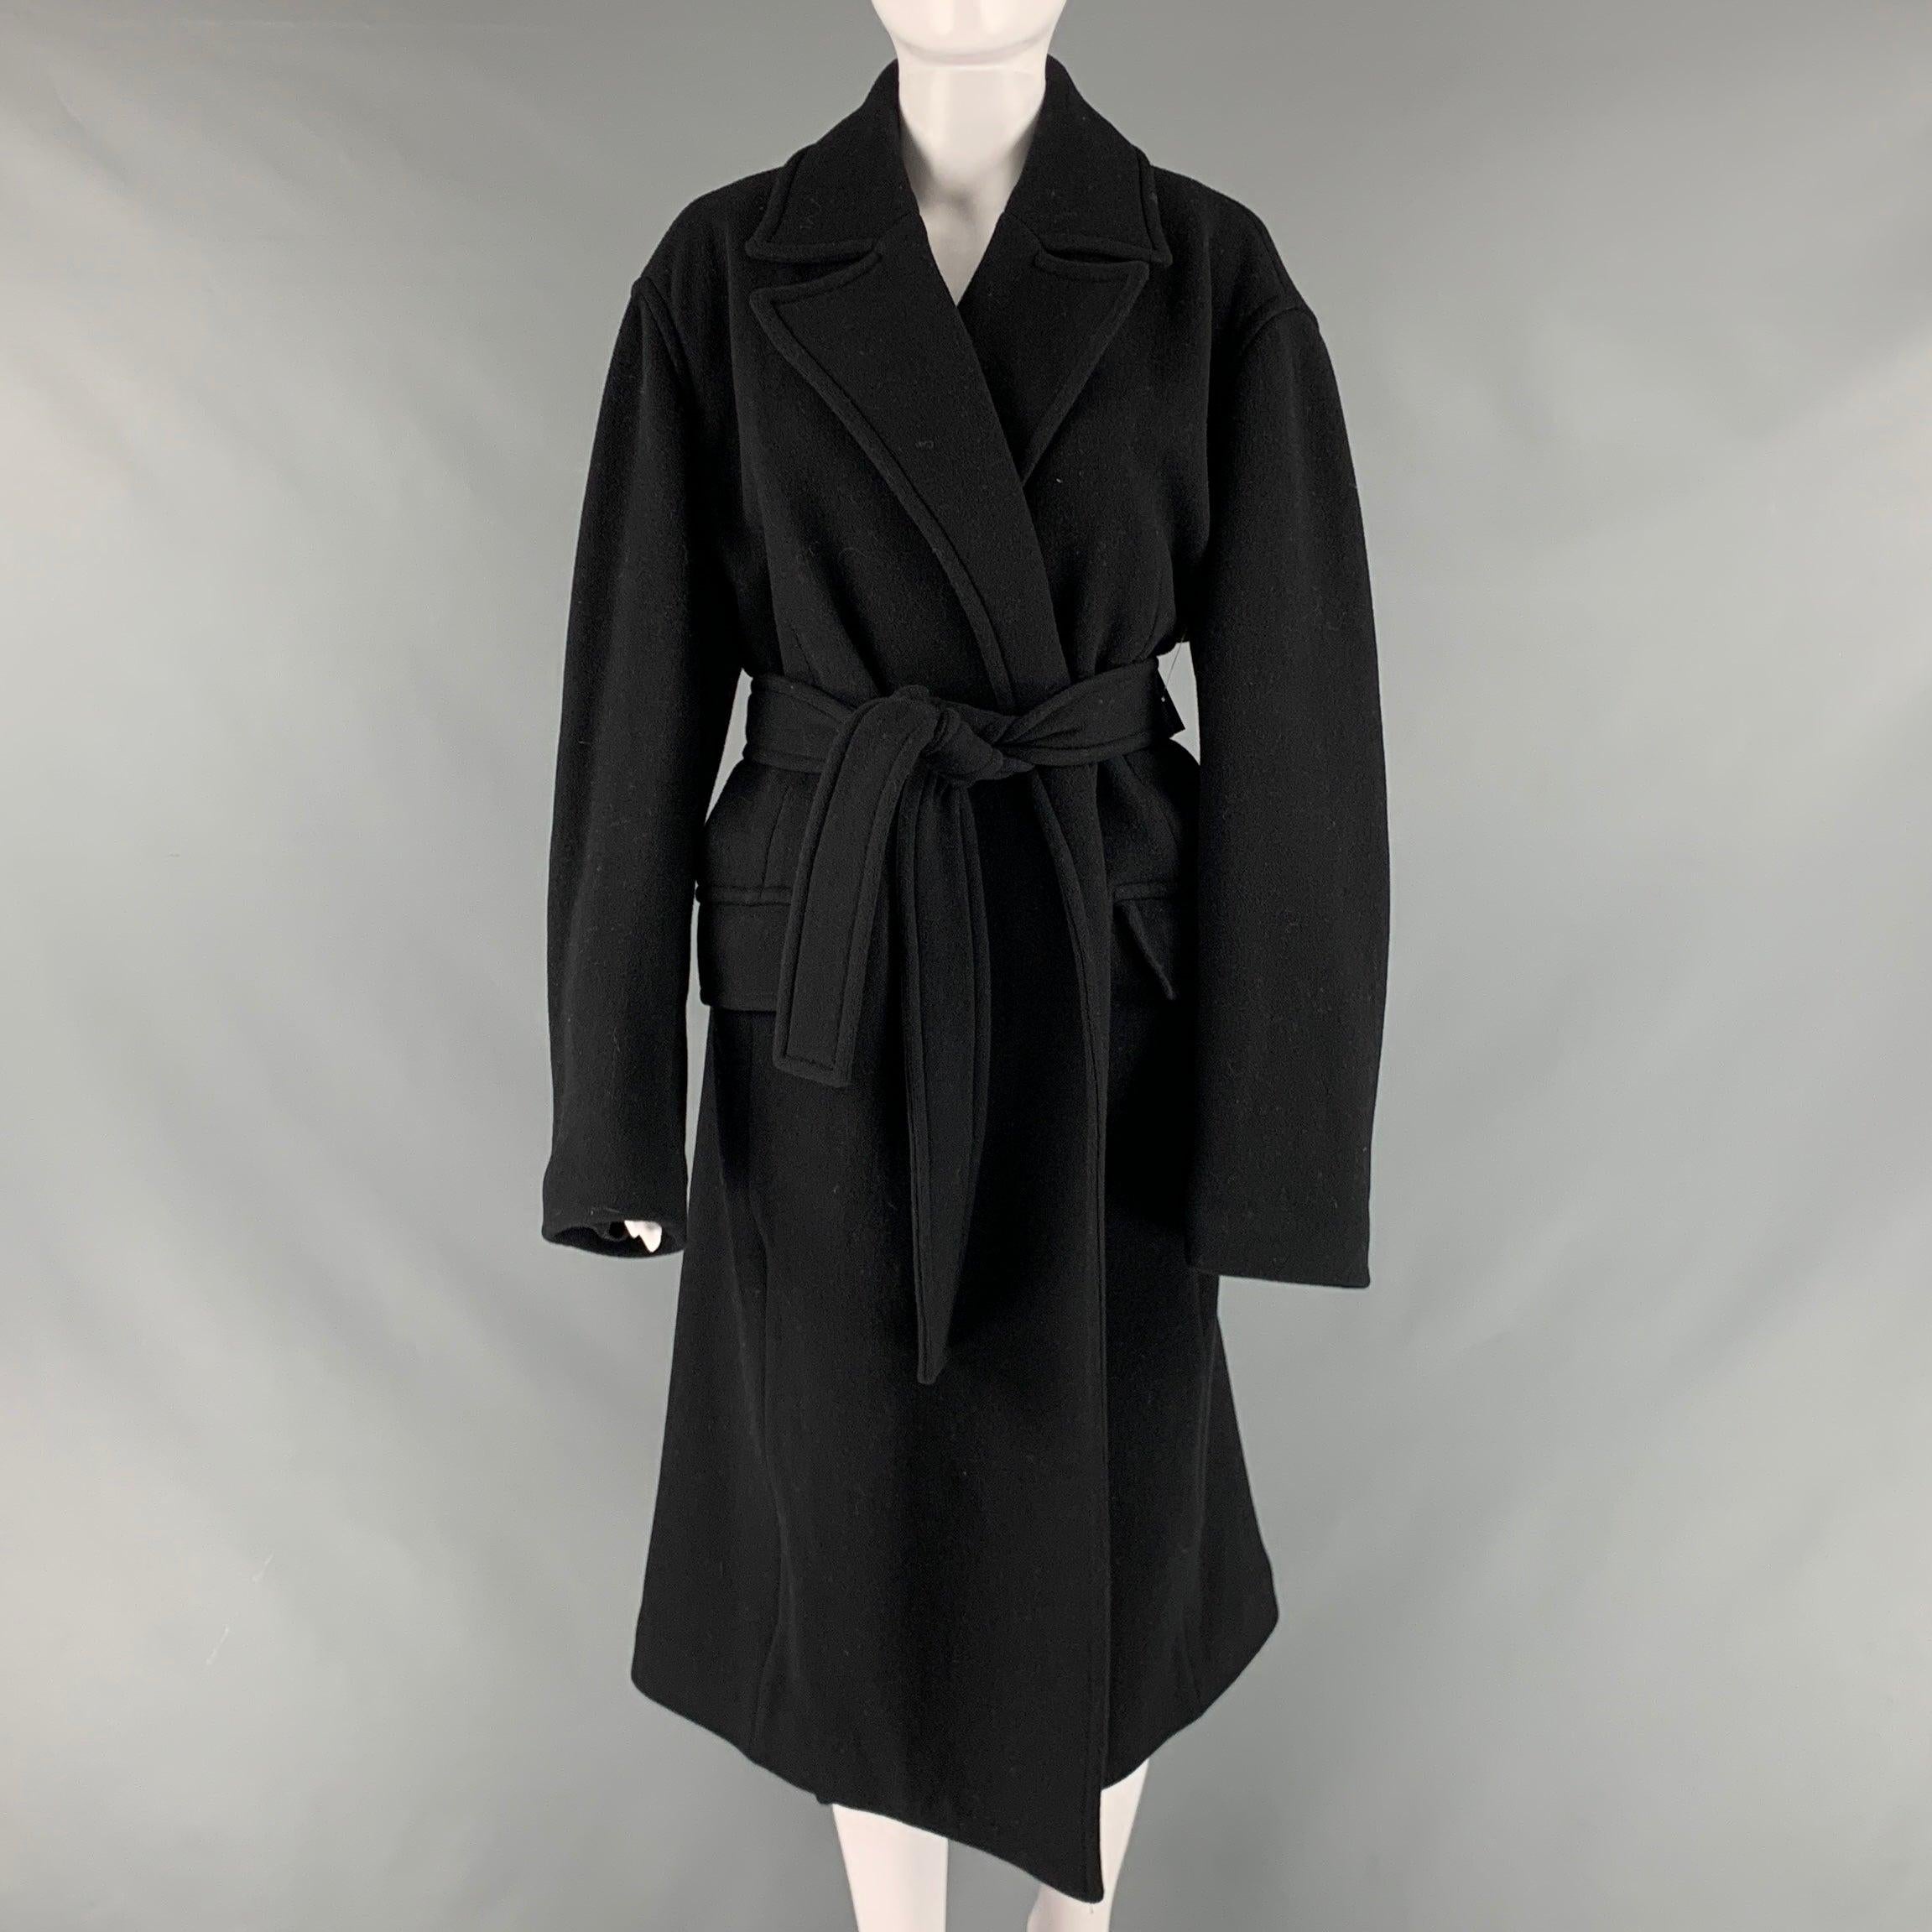 THEORY coat comes in a black wool with full lining featuring a single breasted style, notch lapel, and belt.Very Good Pre-Owned Condition. Minor marks. 

Marked:   L 

Measurements: 
 
Shoulder: 19.5 inches Bust: 46 inches Sleeve: 24.5 inches